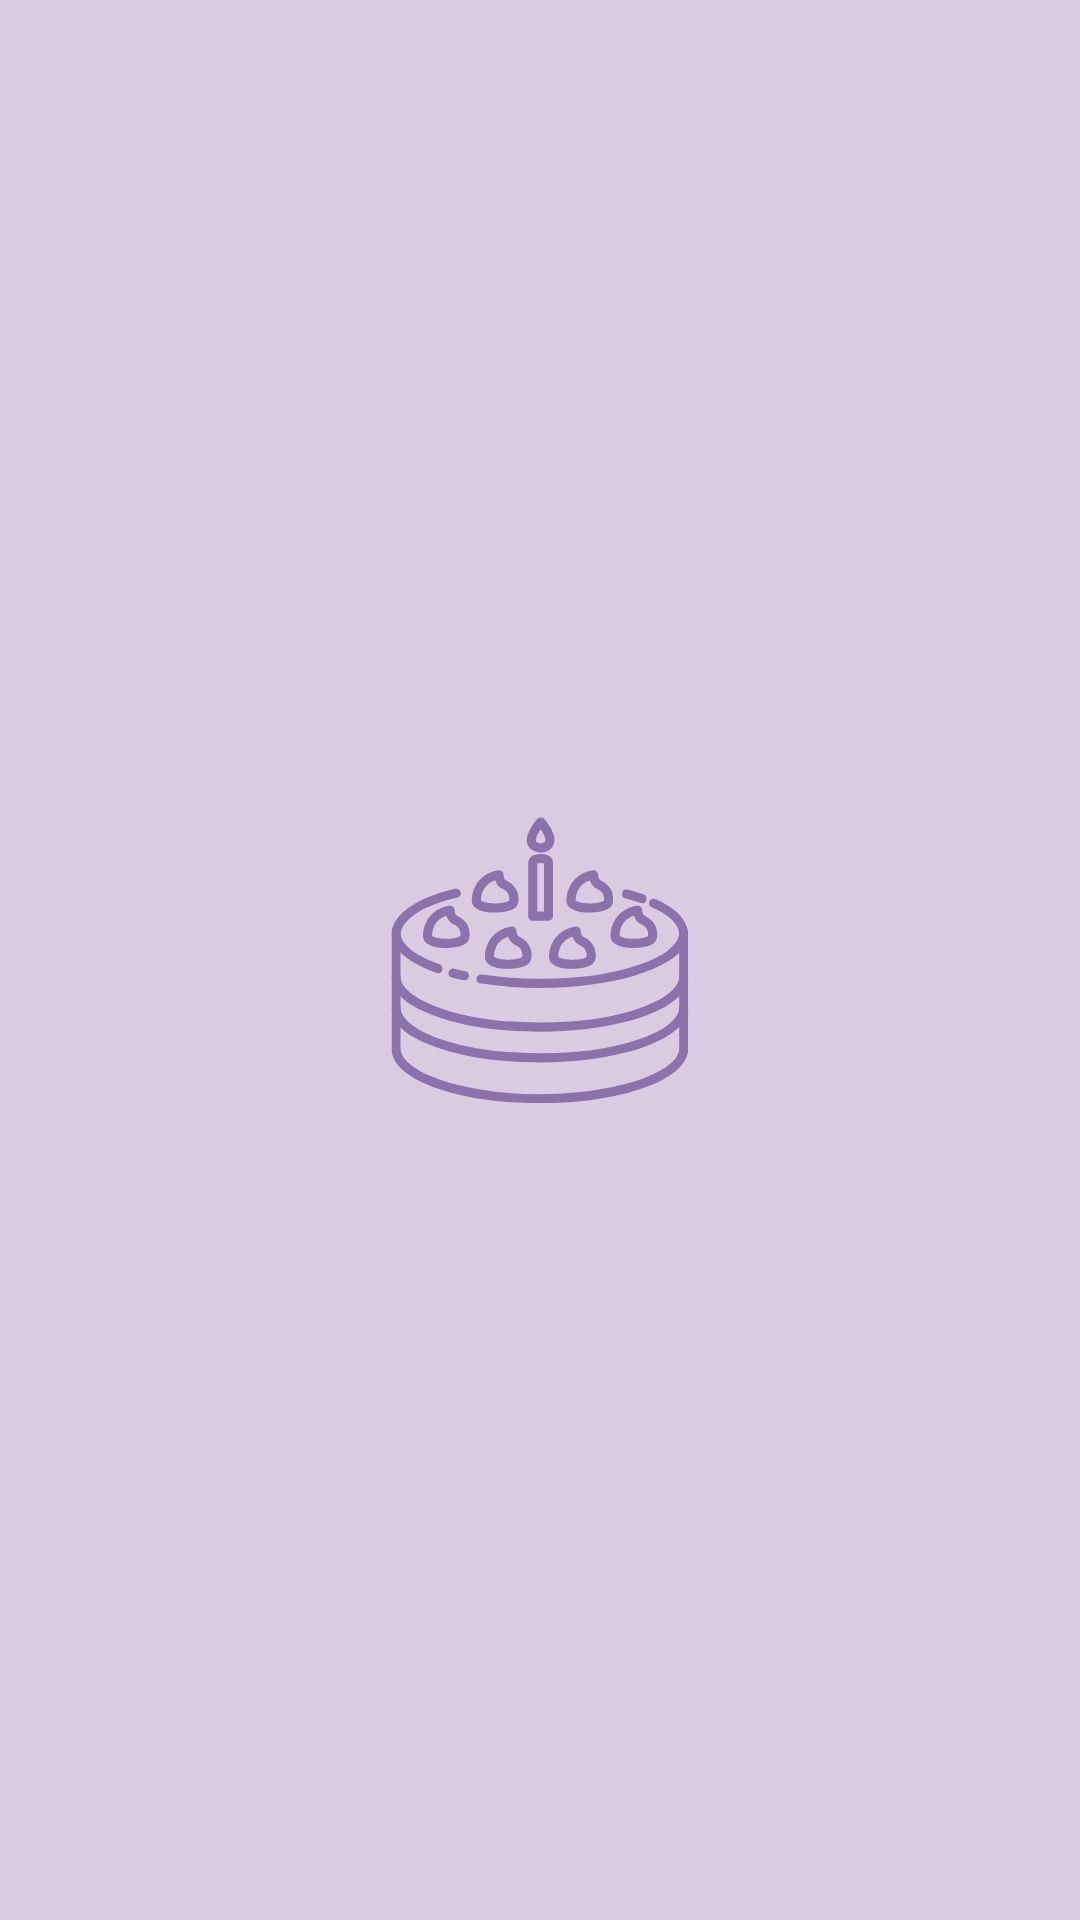 Happy birthday instagram story highlight cover purple with cake icon